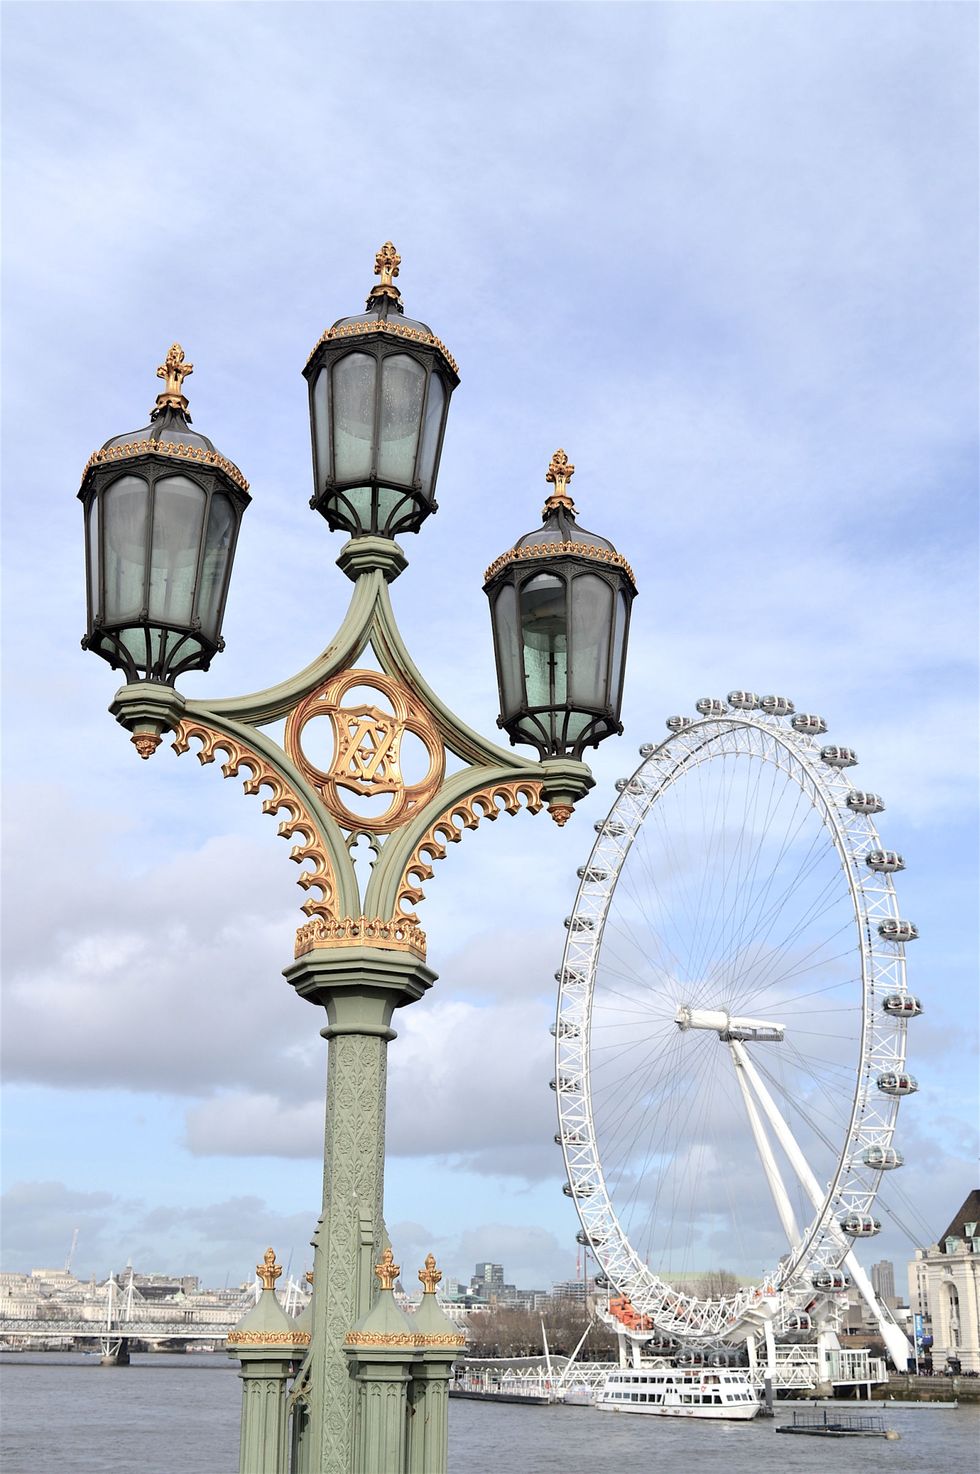 <p>The London Eye is the U.K.'s tallest Ferris wheel (it was Europe's tallest before Brexit) and the most popular paid <a href="https://en.wikipedia.org/wiki/Tourist_attractions_in_the_United_Kingdom">tourist attraction in the United Kingdom</a>. It can be perfectly admired from the Westminster Bridge and is a great way to admire the sunset over the House of Parliament.  </p>